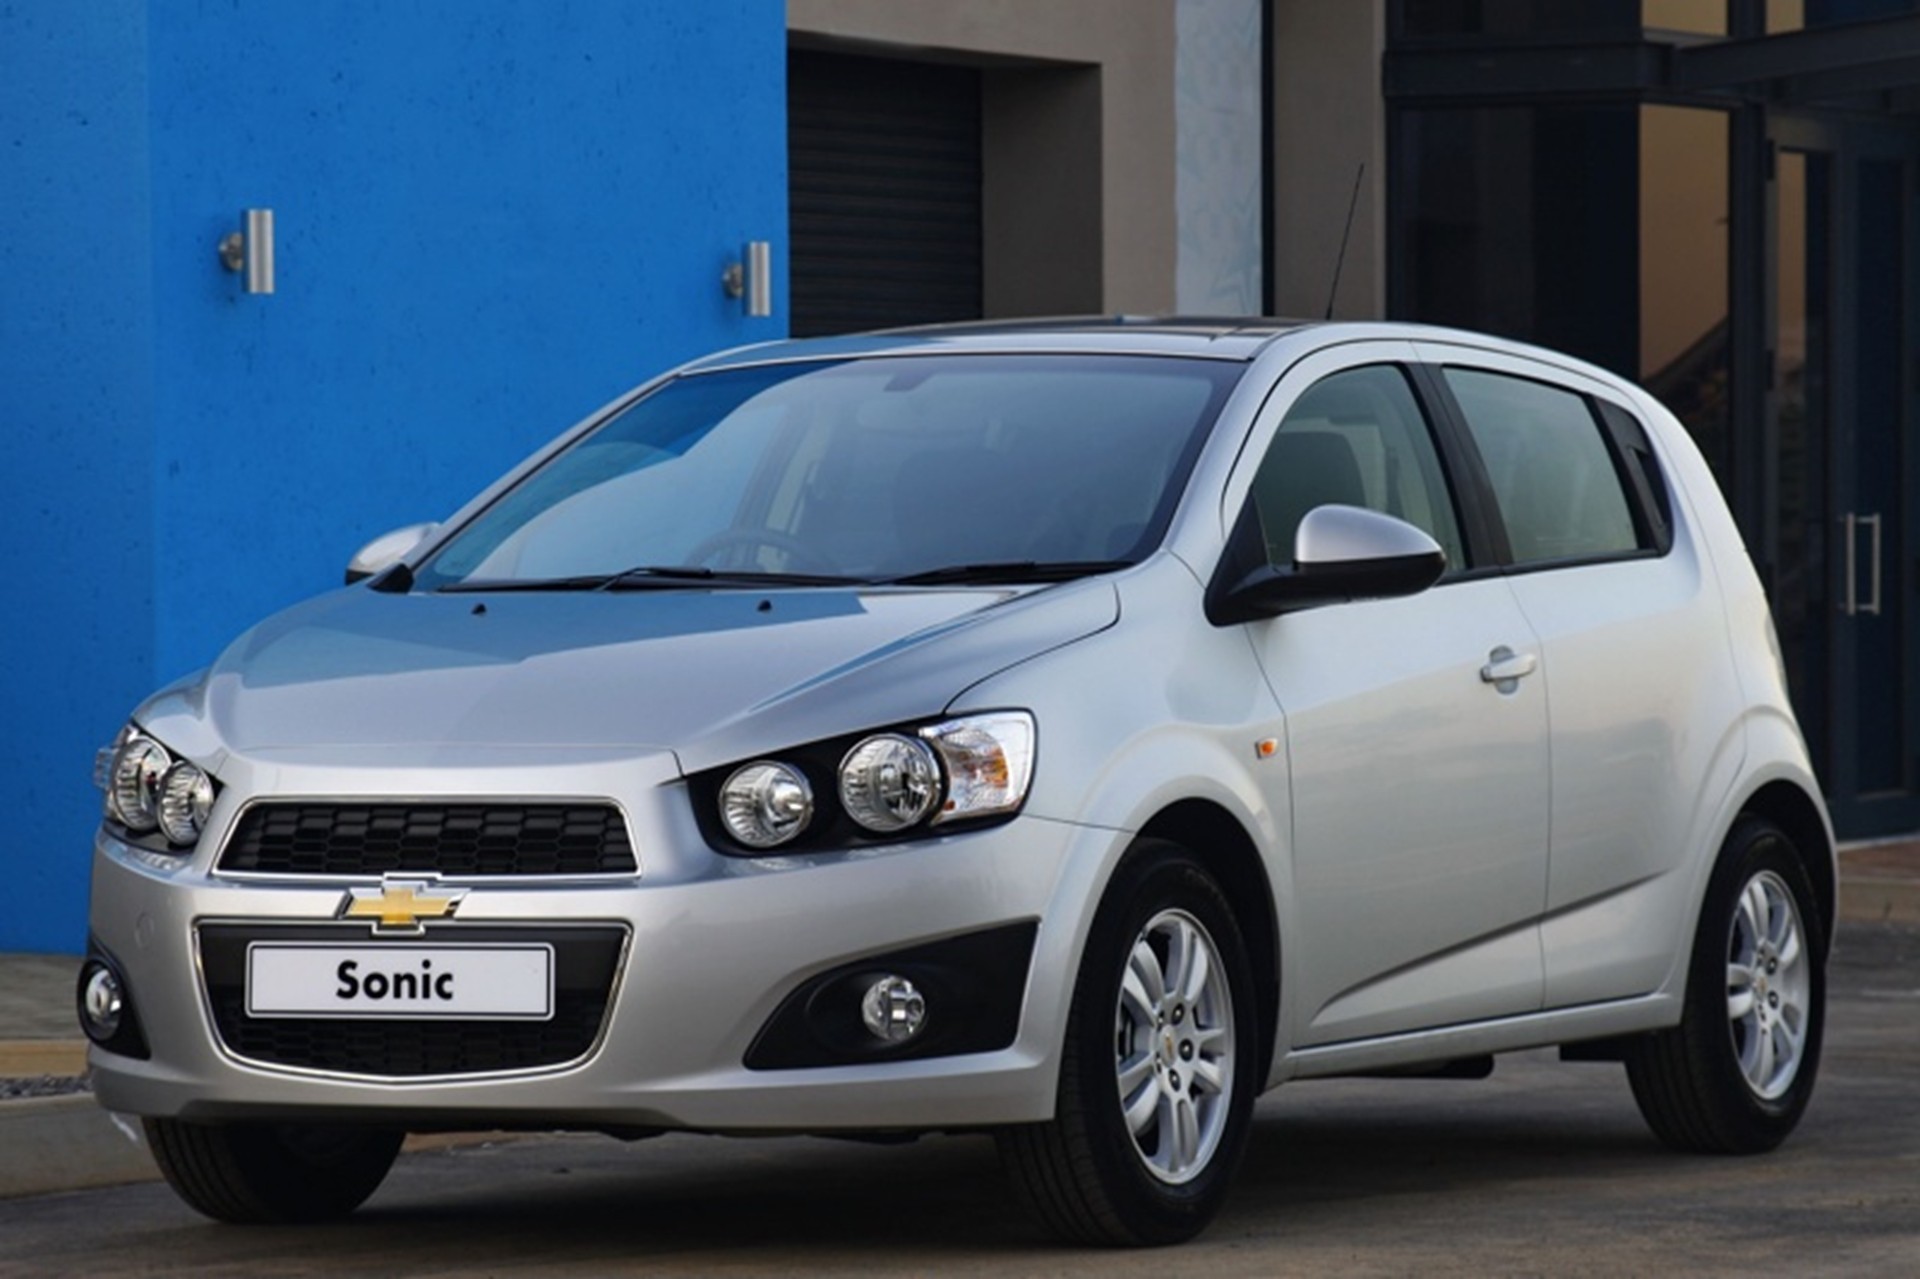 New Chevrolet Sonic boasts refined ride and handling